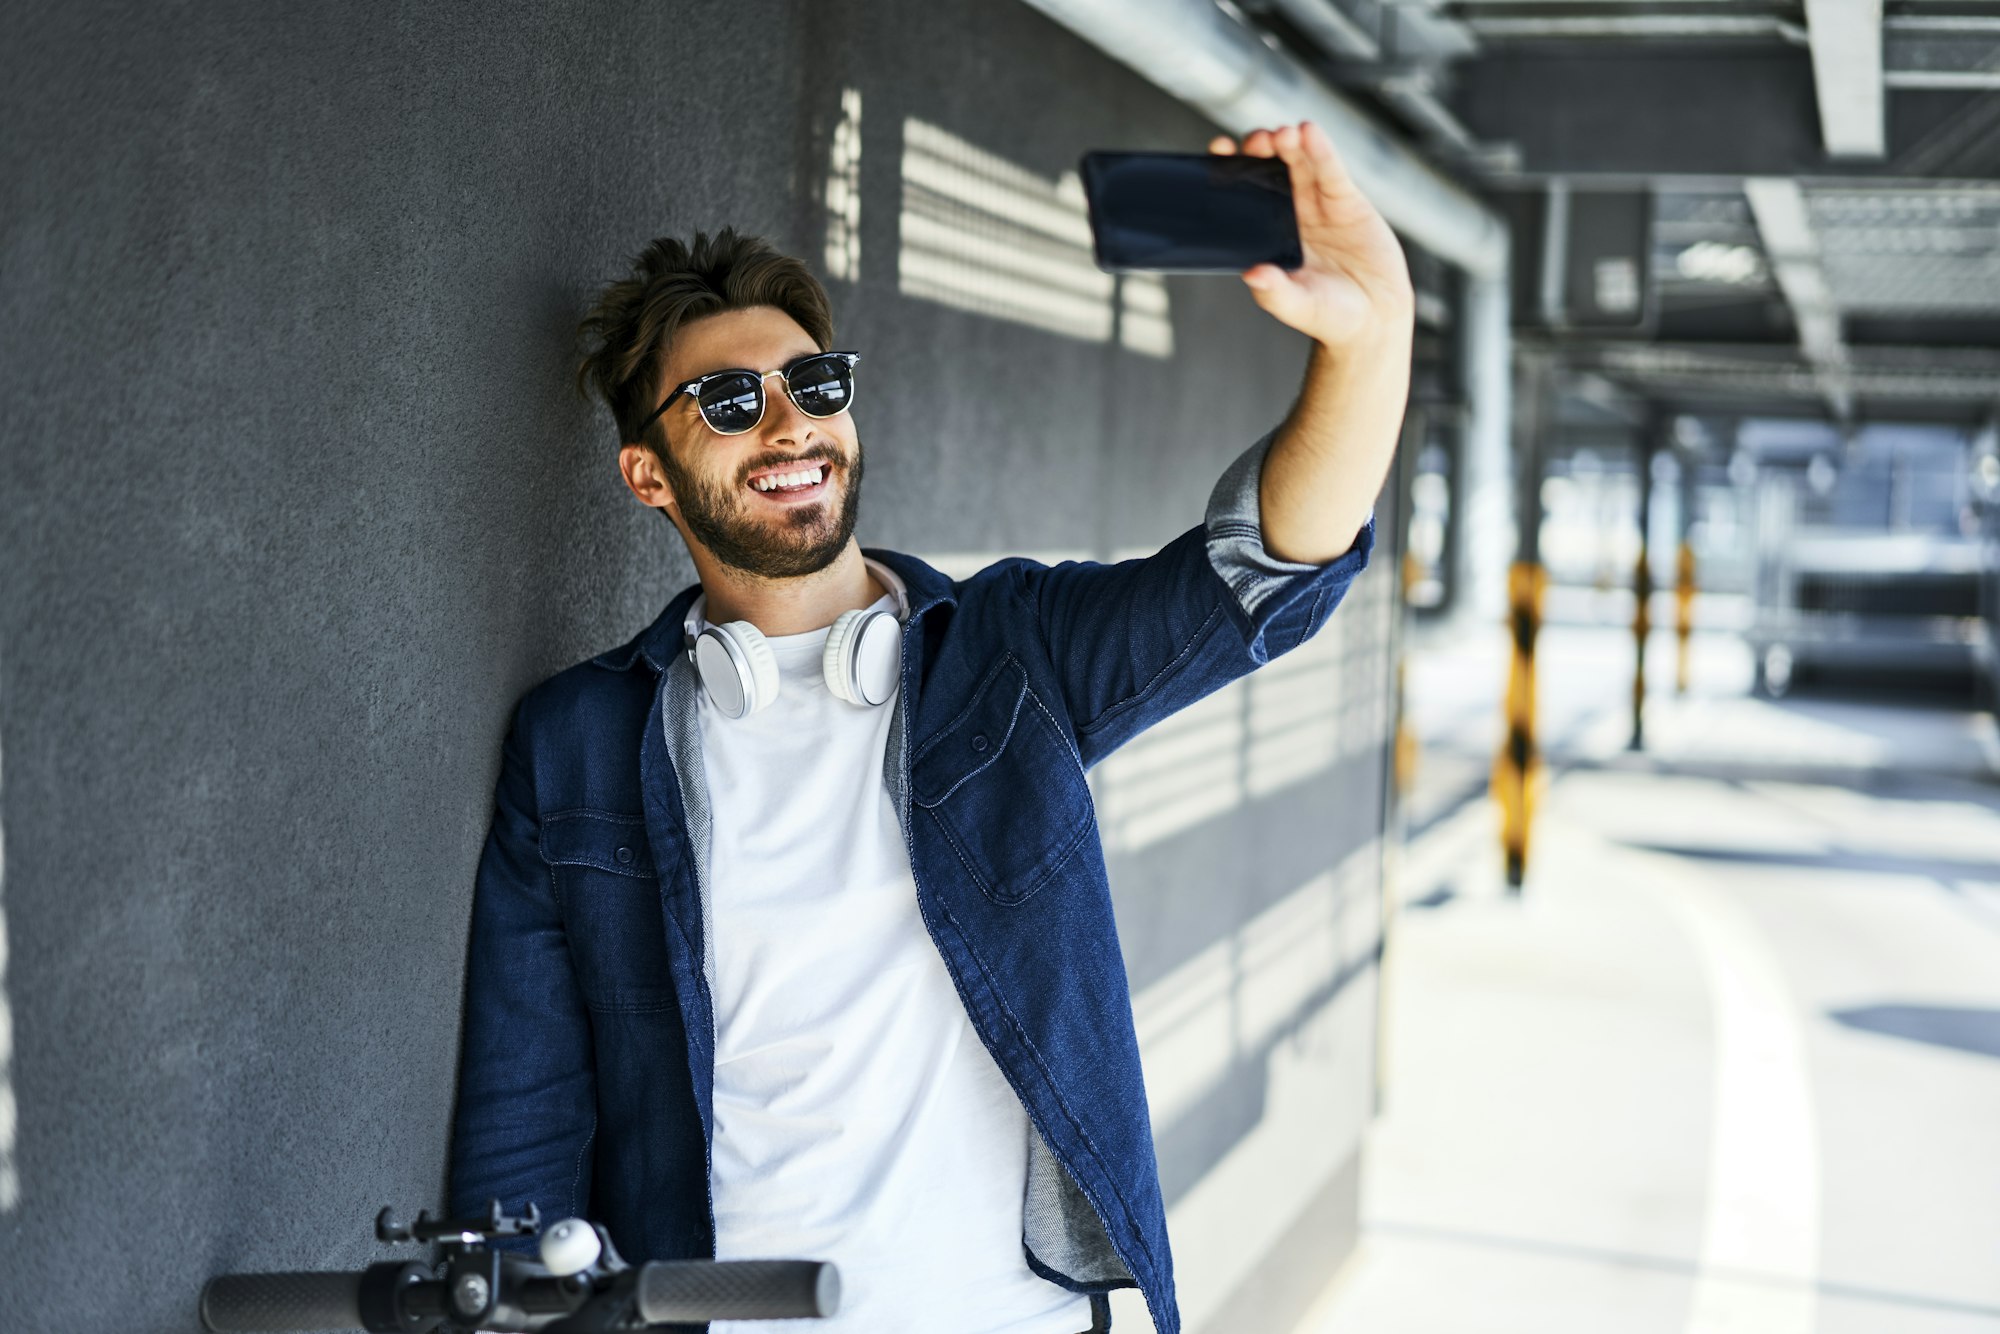 Portrait of smiling man taking selfie with smartphone